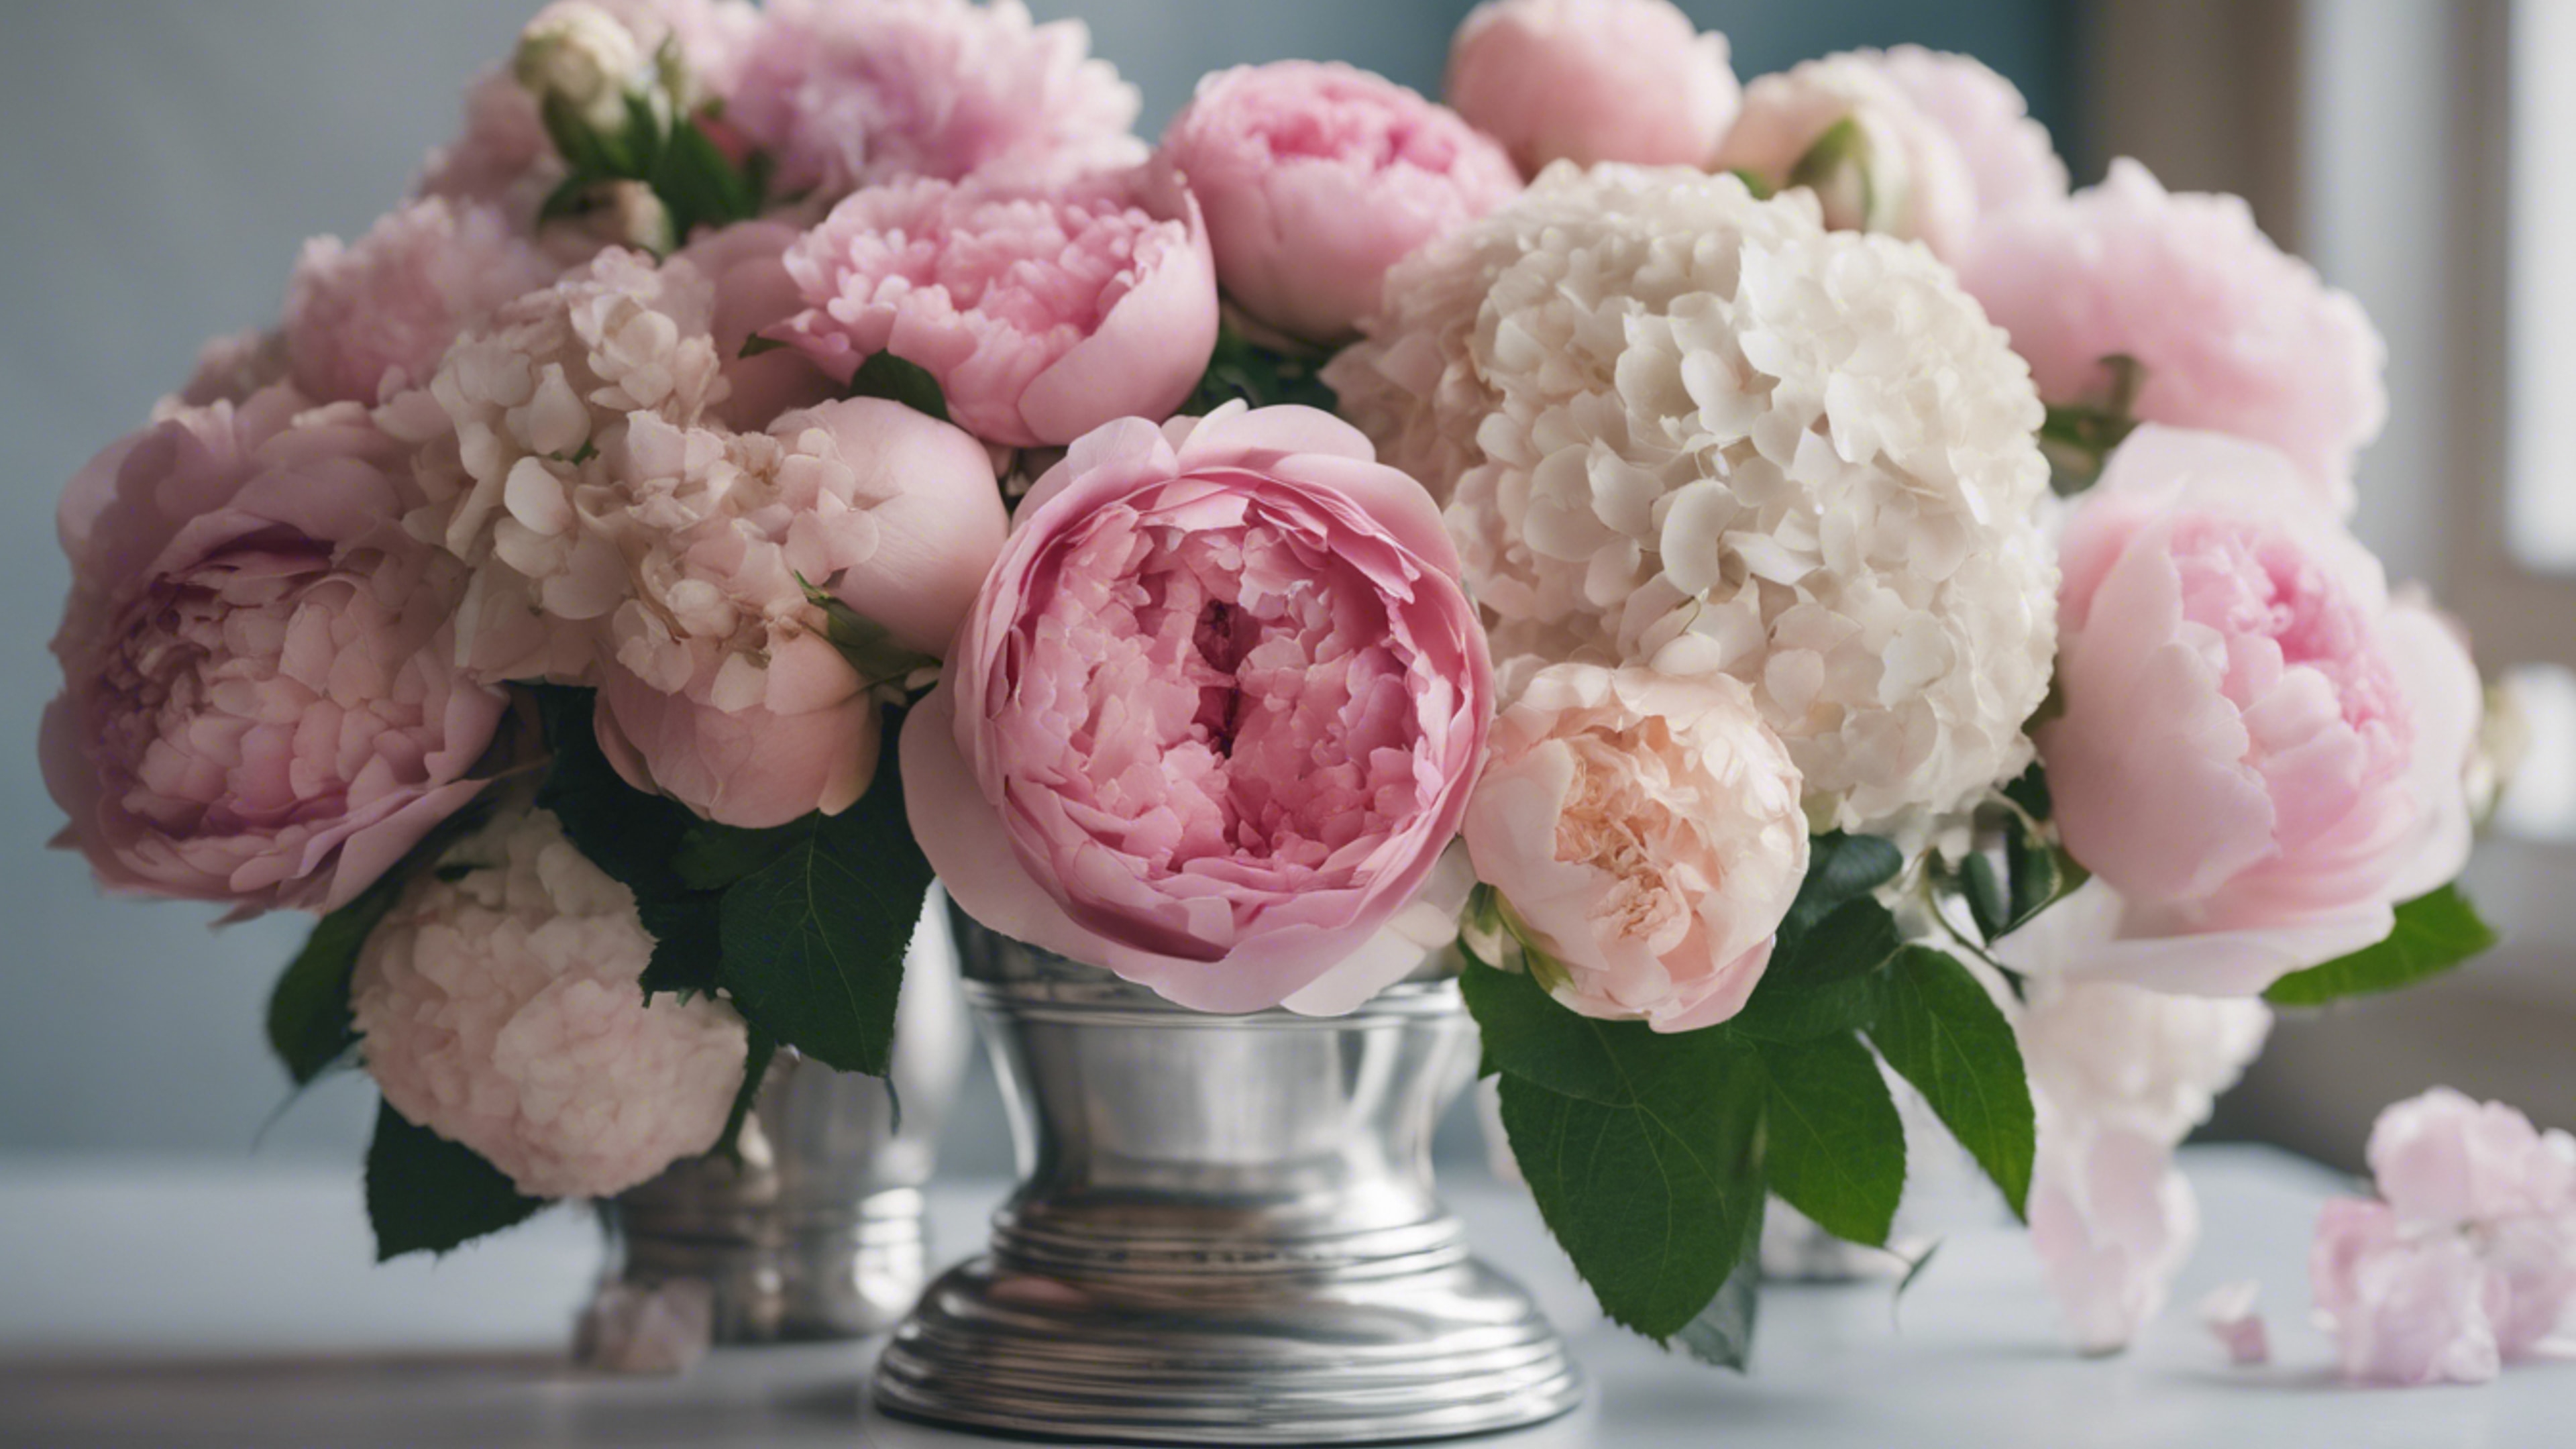 An arrangement of pink roses, peonies, and hydrangeas in a silver vase, embodying preppy elegance. Wallpaper[810d260cf91945bd97fc]